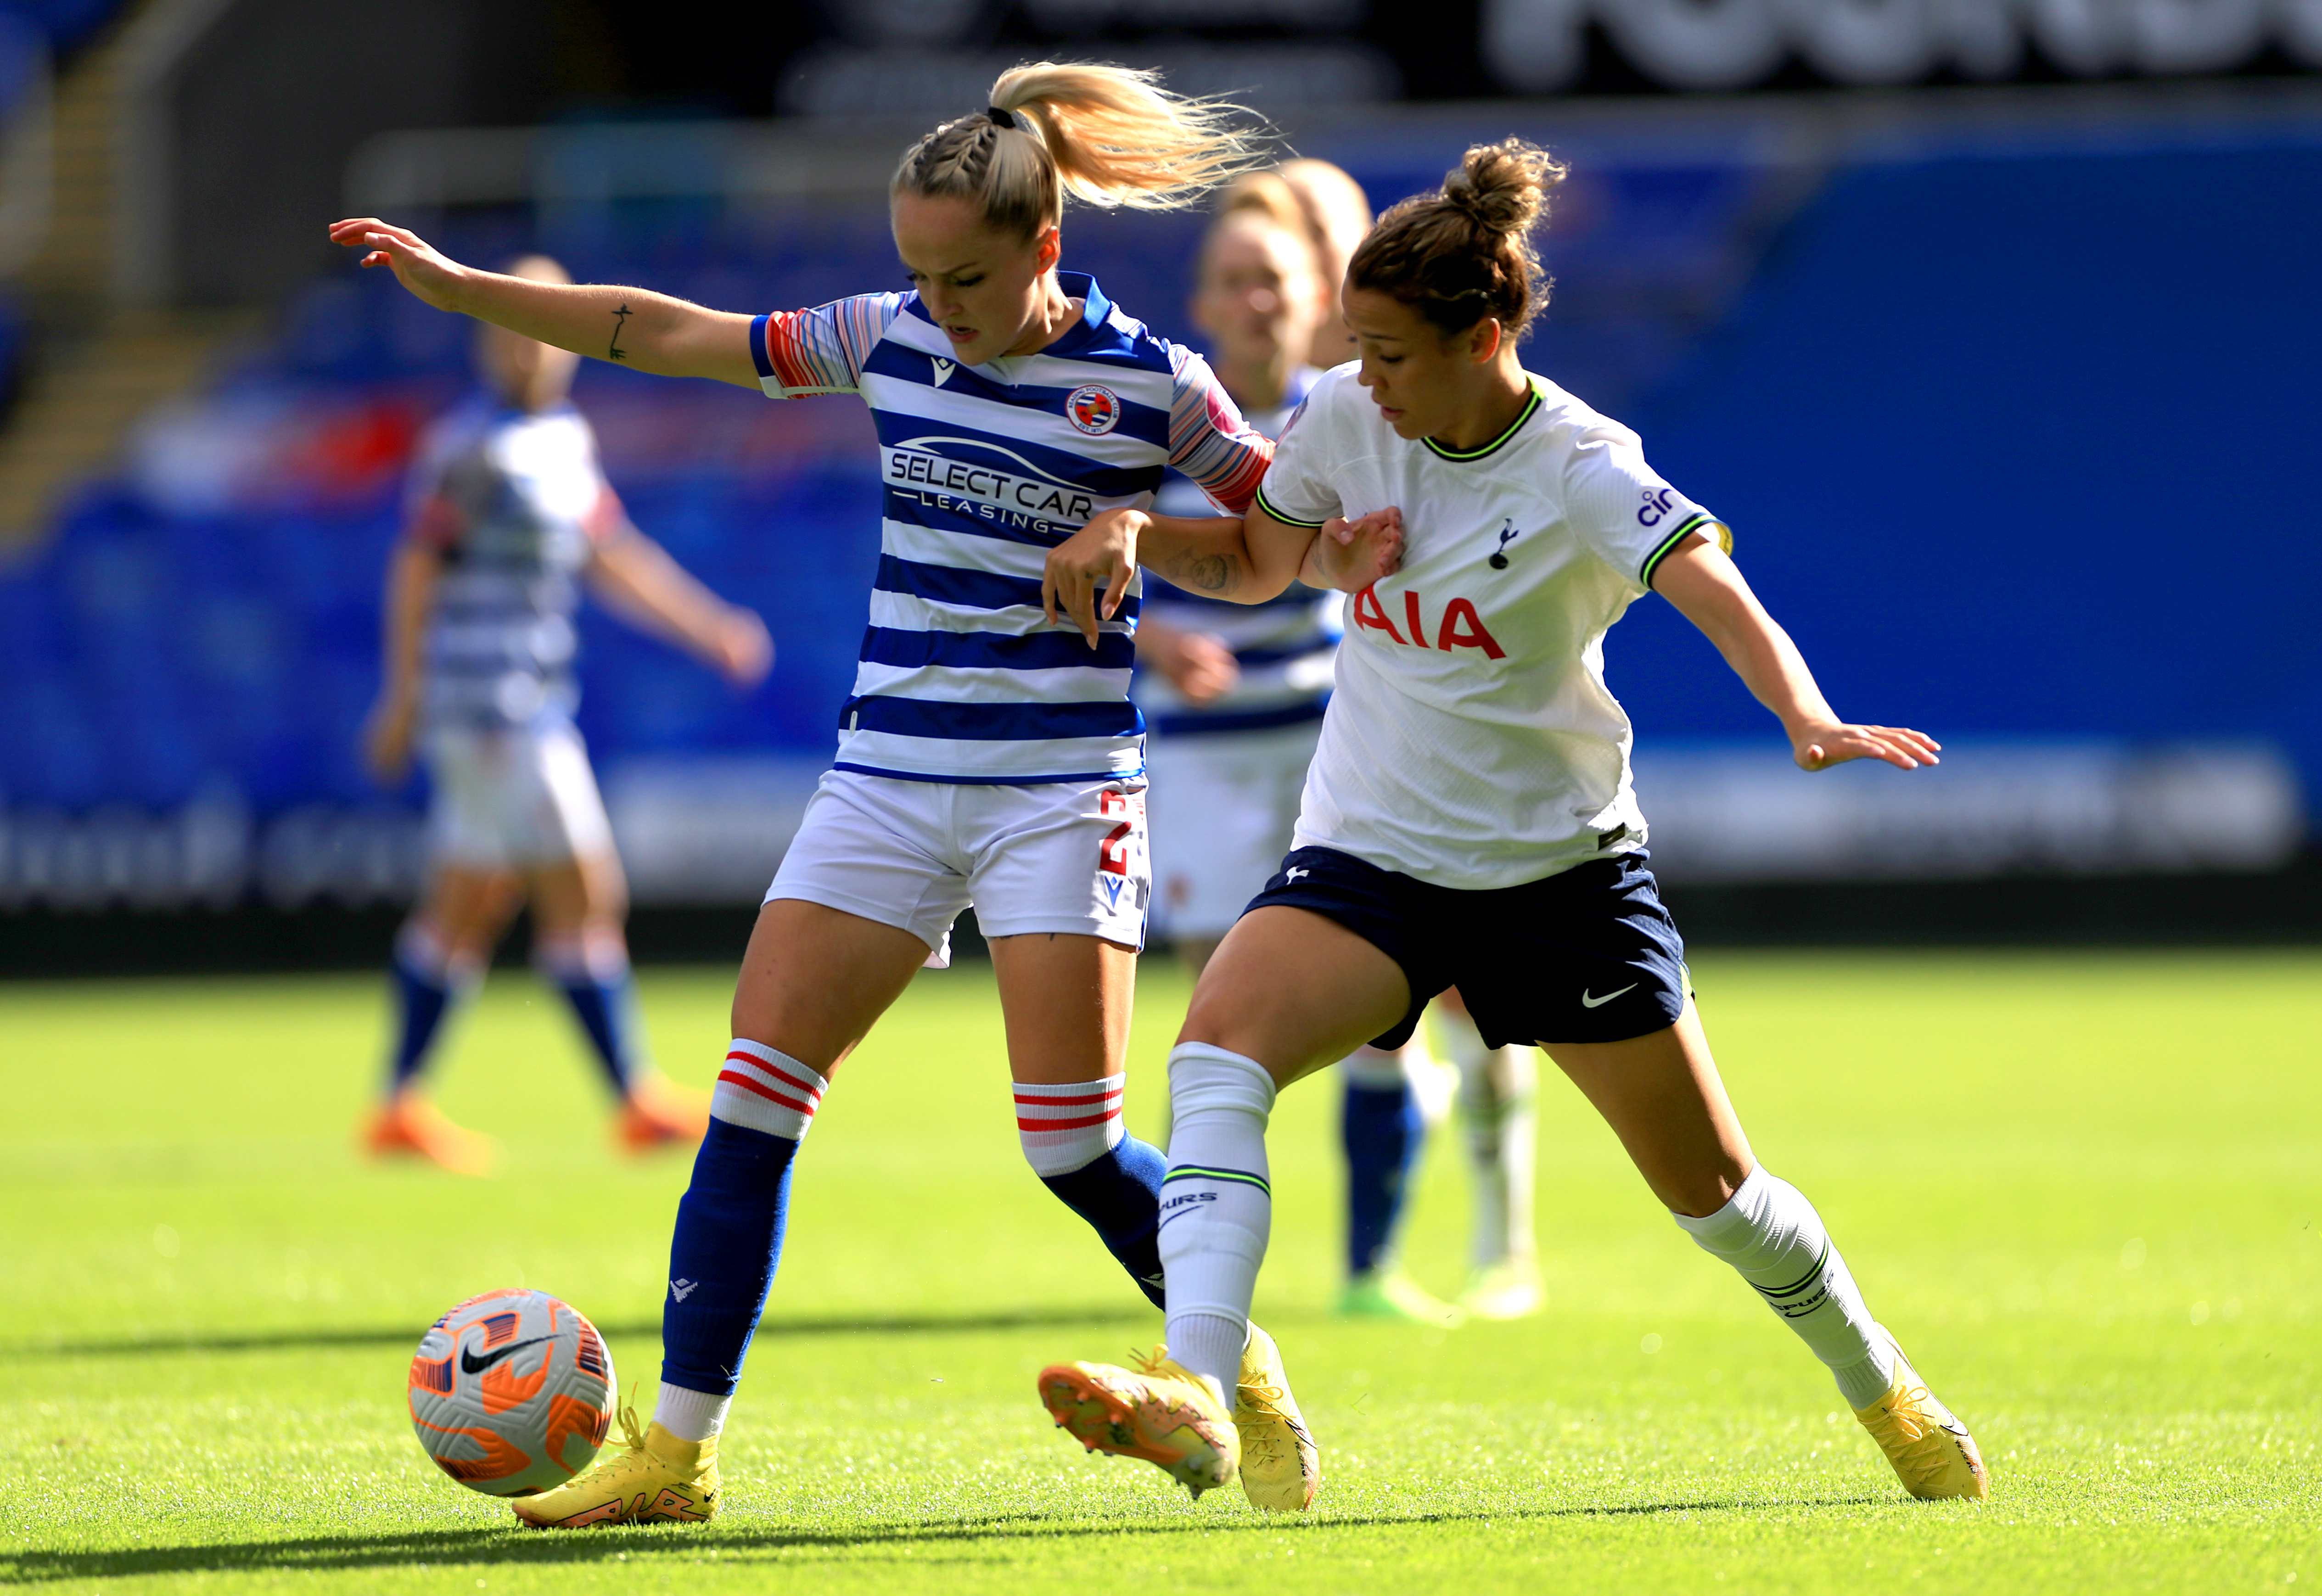 Reading v Tottenham Hotspur - FA Women’s Continental League Cup - Group Stage - Group E - Select Car Leasing Stadium